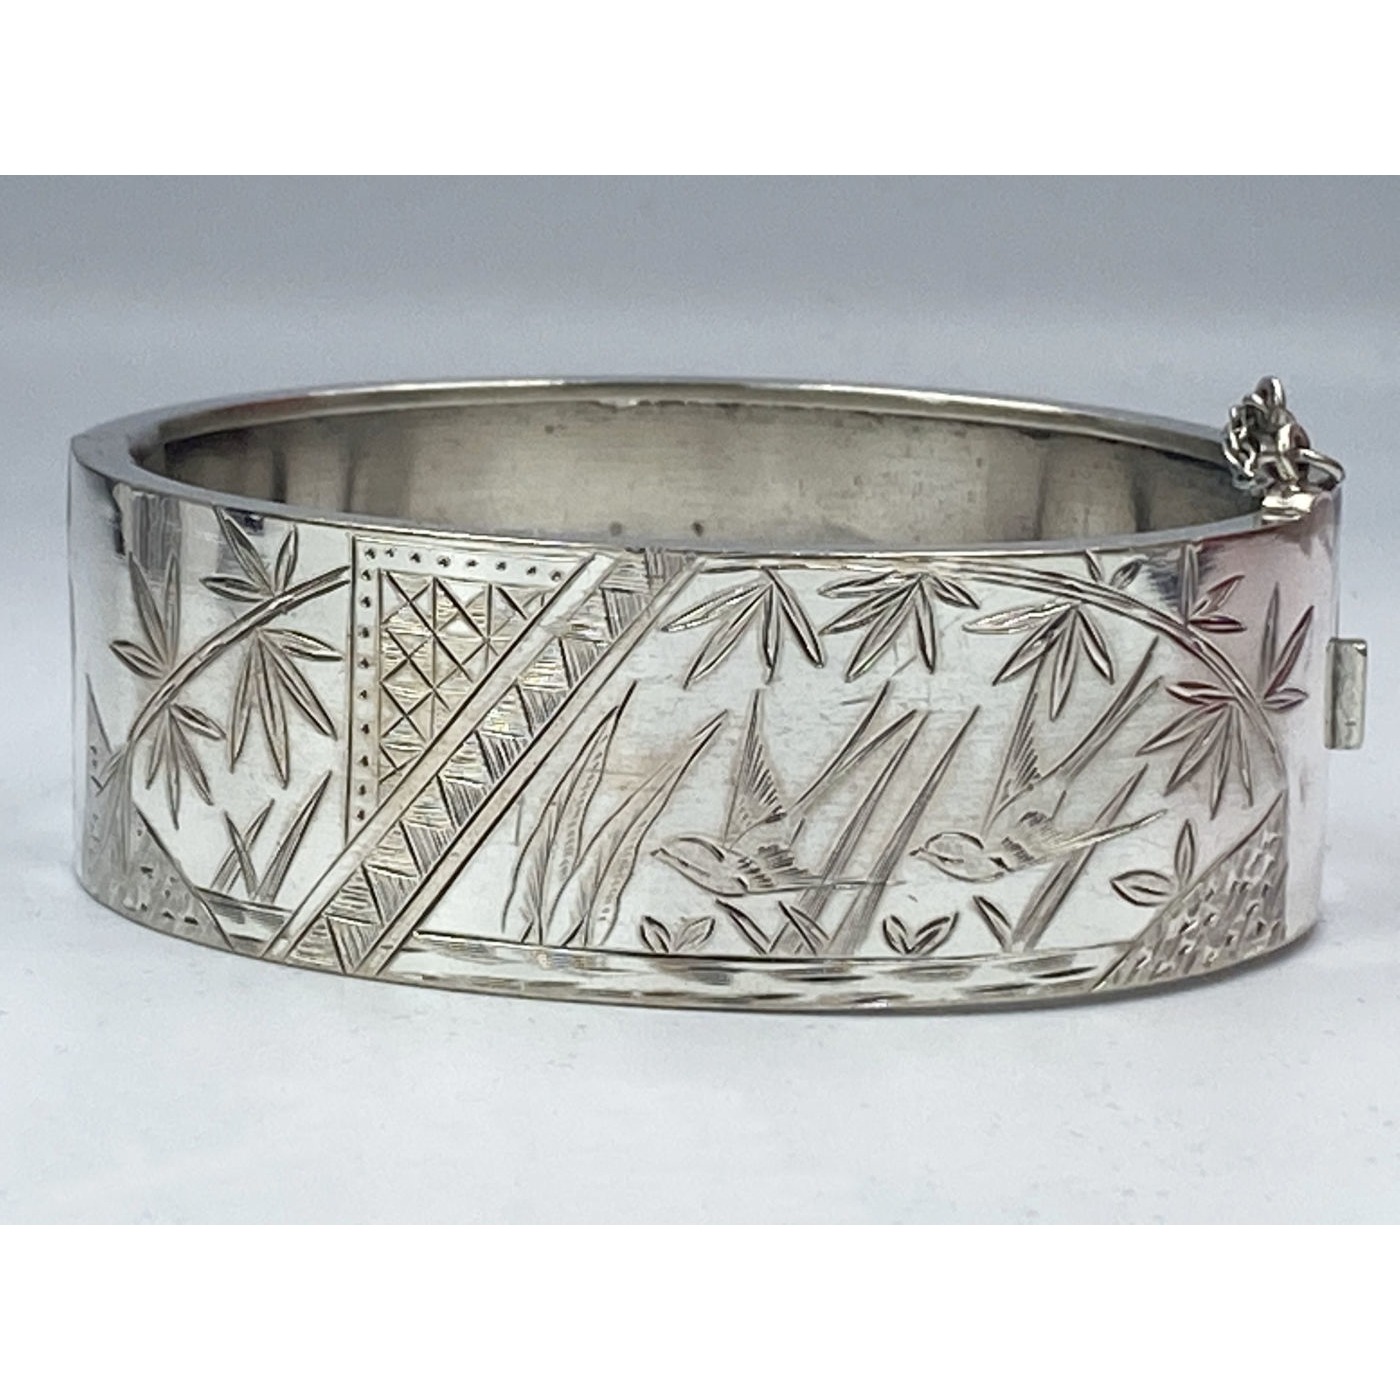 Stylized Birds and Trees, I Will Return Motto, Antique English Silver Bangle